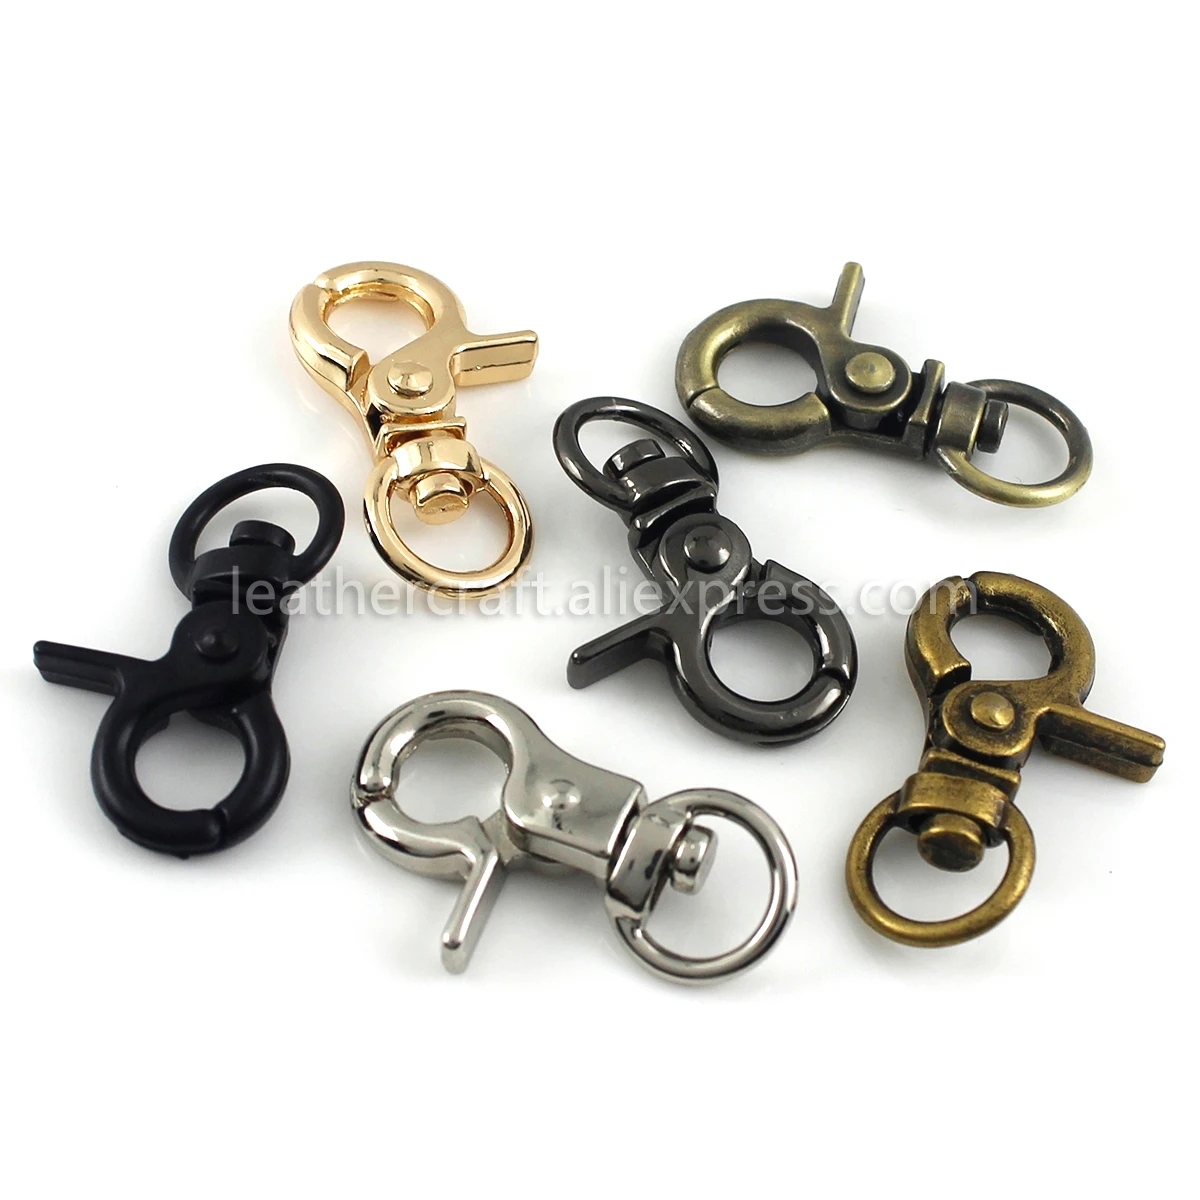 1x Metal Tiny Snap Hook Trigger Lobster Clasps Clips Spring Gate Leather Craft Tiny Pet Leash Bag Strap Webbing Keychain Hooks